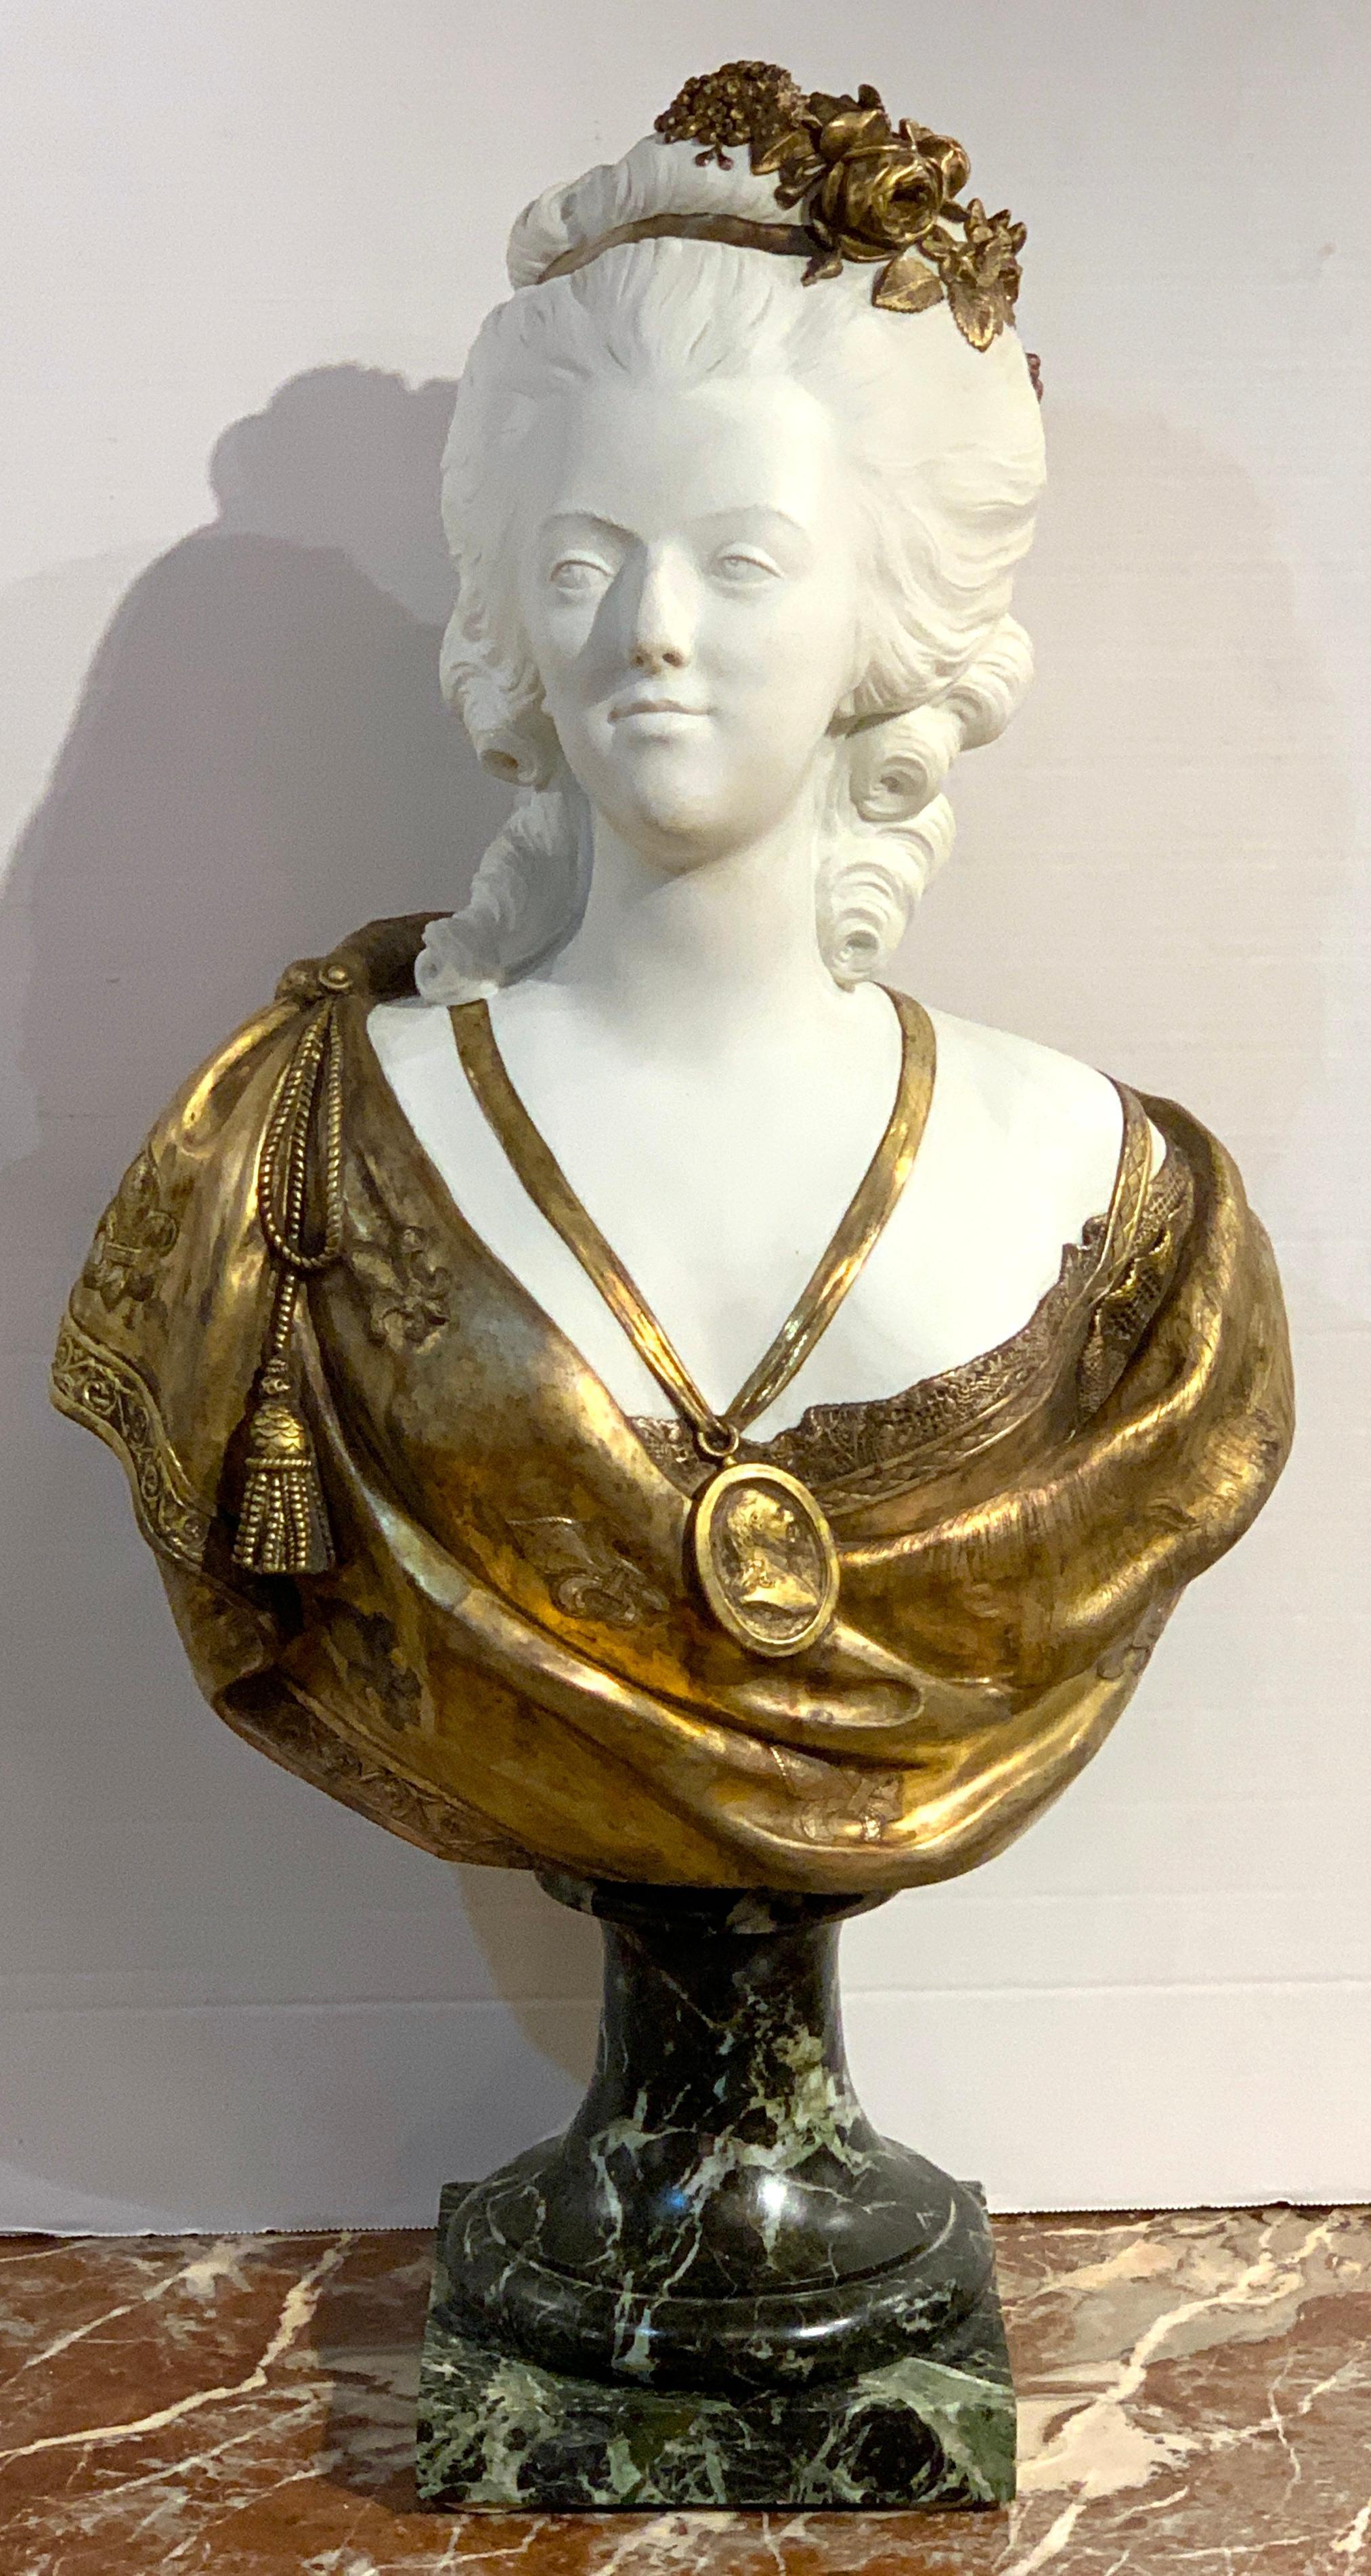 Sèvres Biscuit Porcelain and Ormolu Bust of Marie Antoinette after F. Lecomte For Sale 1